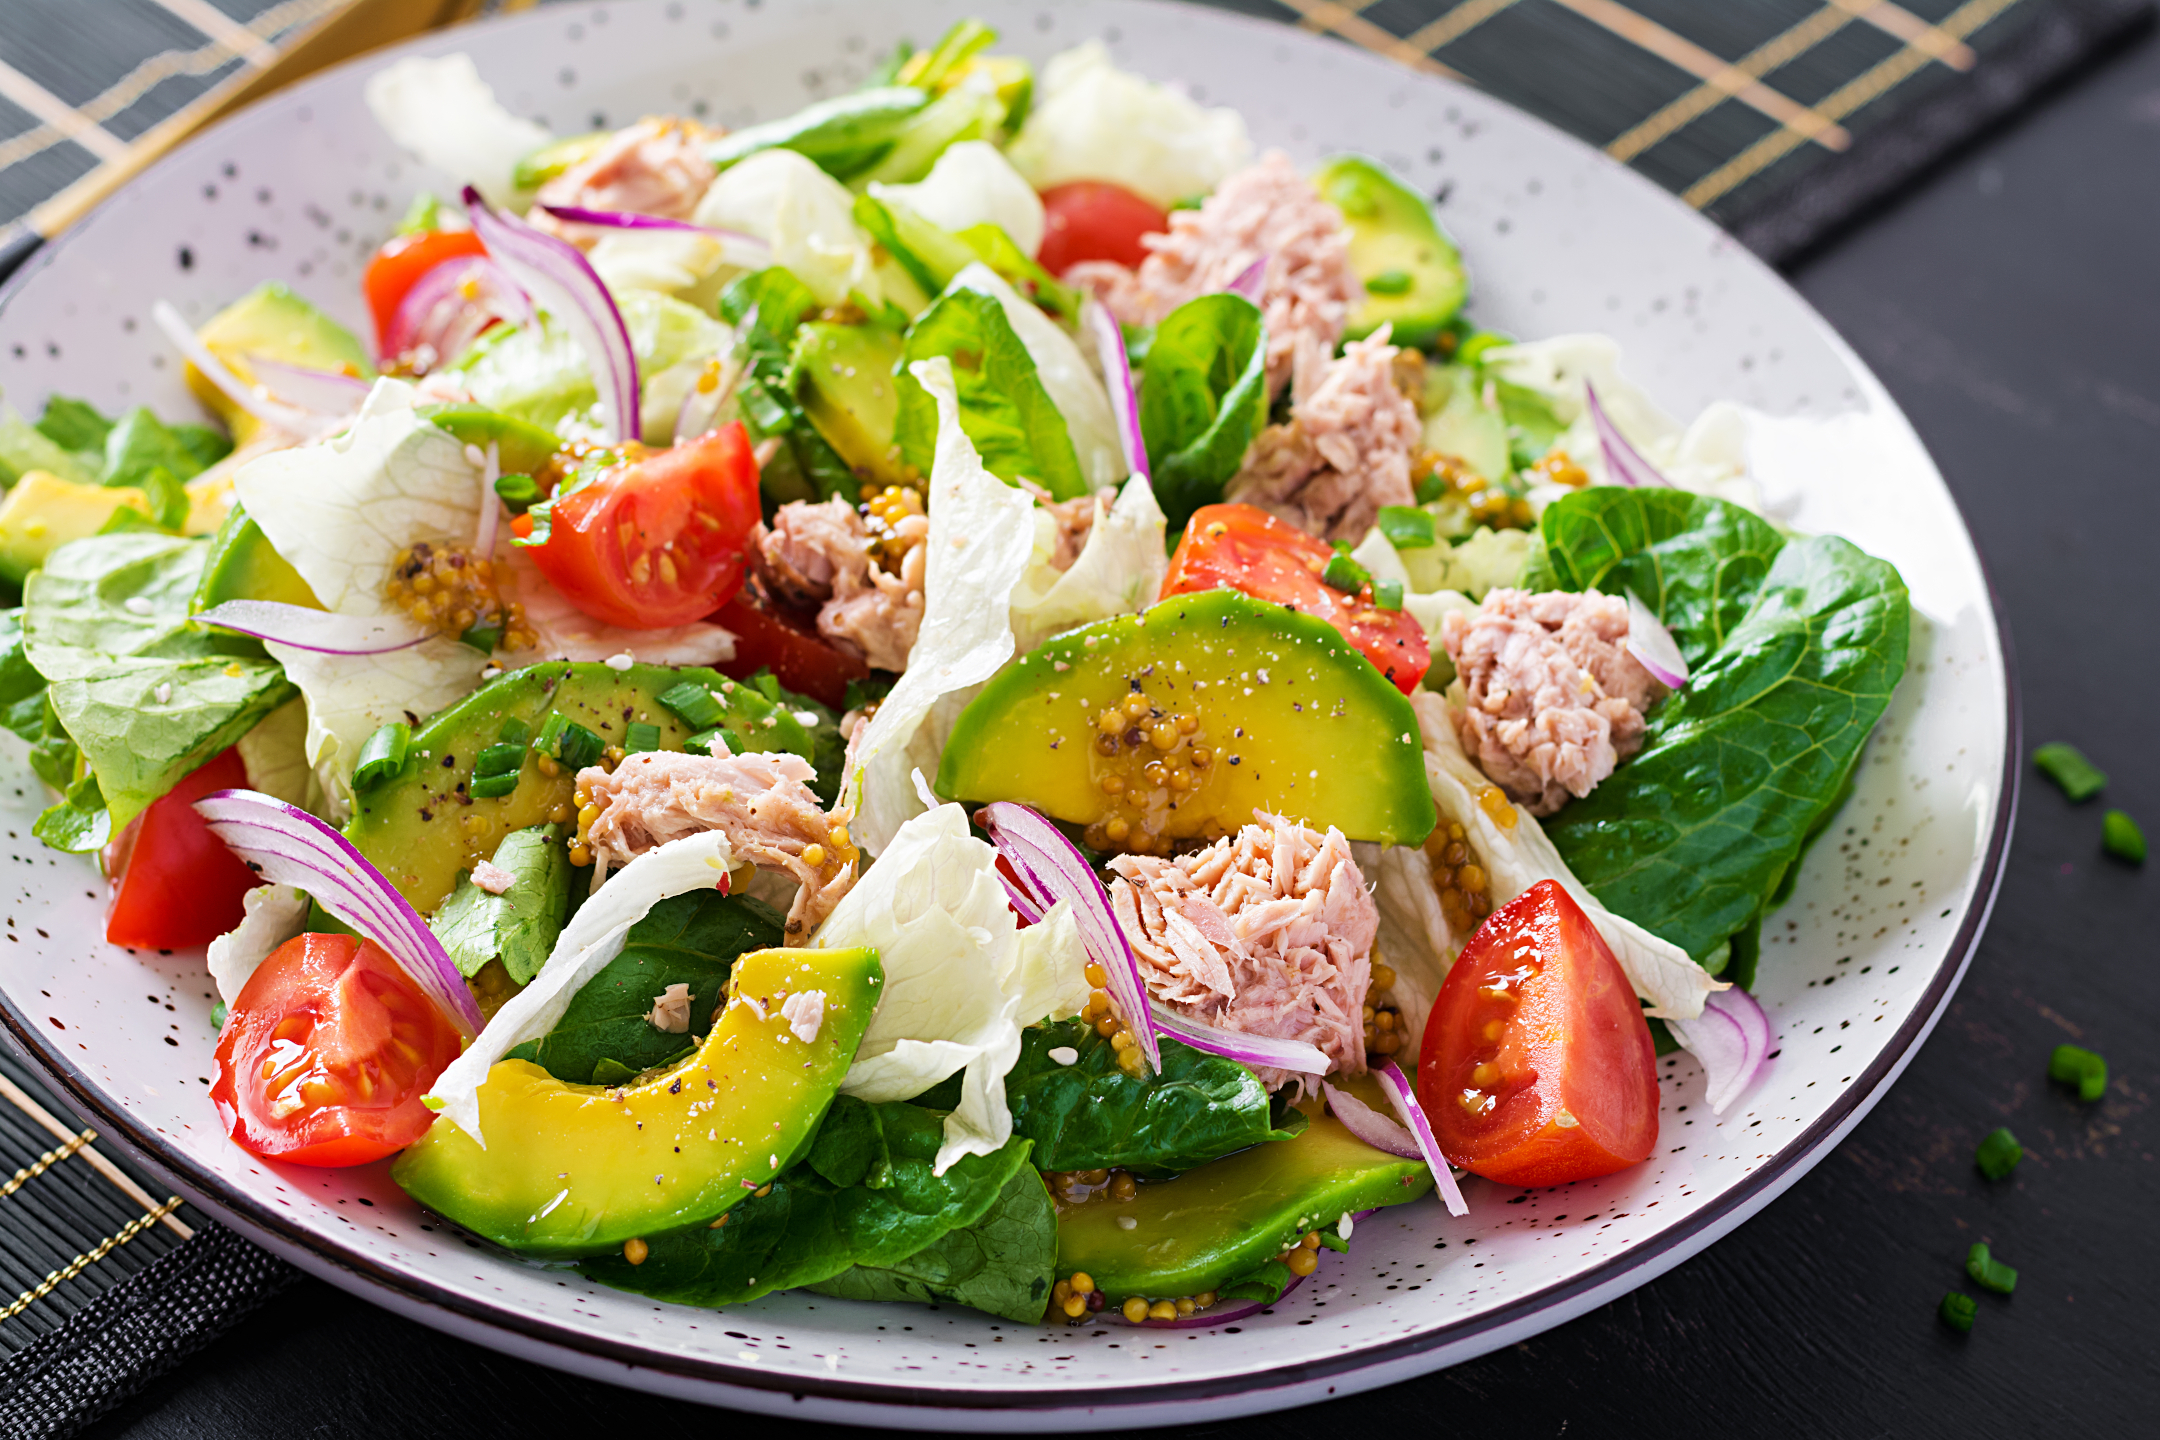 Tuna fish salad with lettuce, cherry tomatoes, avocado, red onions, health food French cuisine